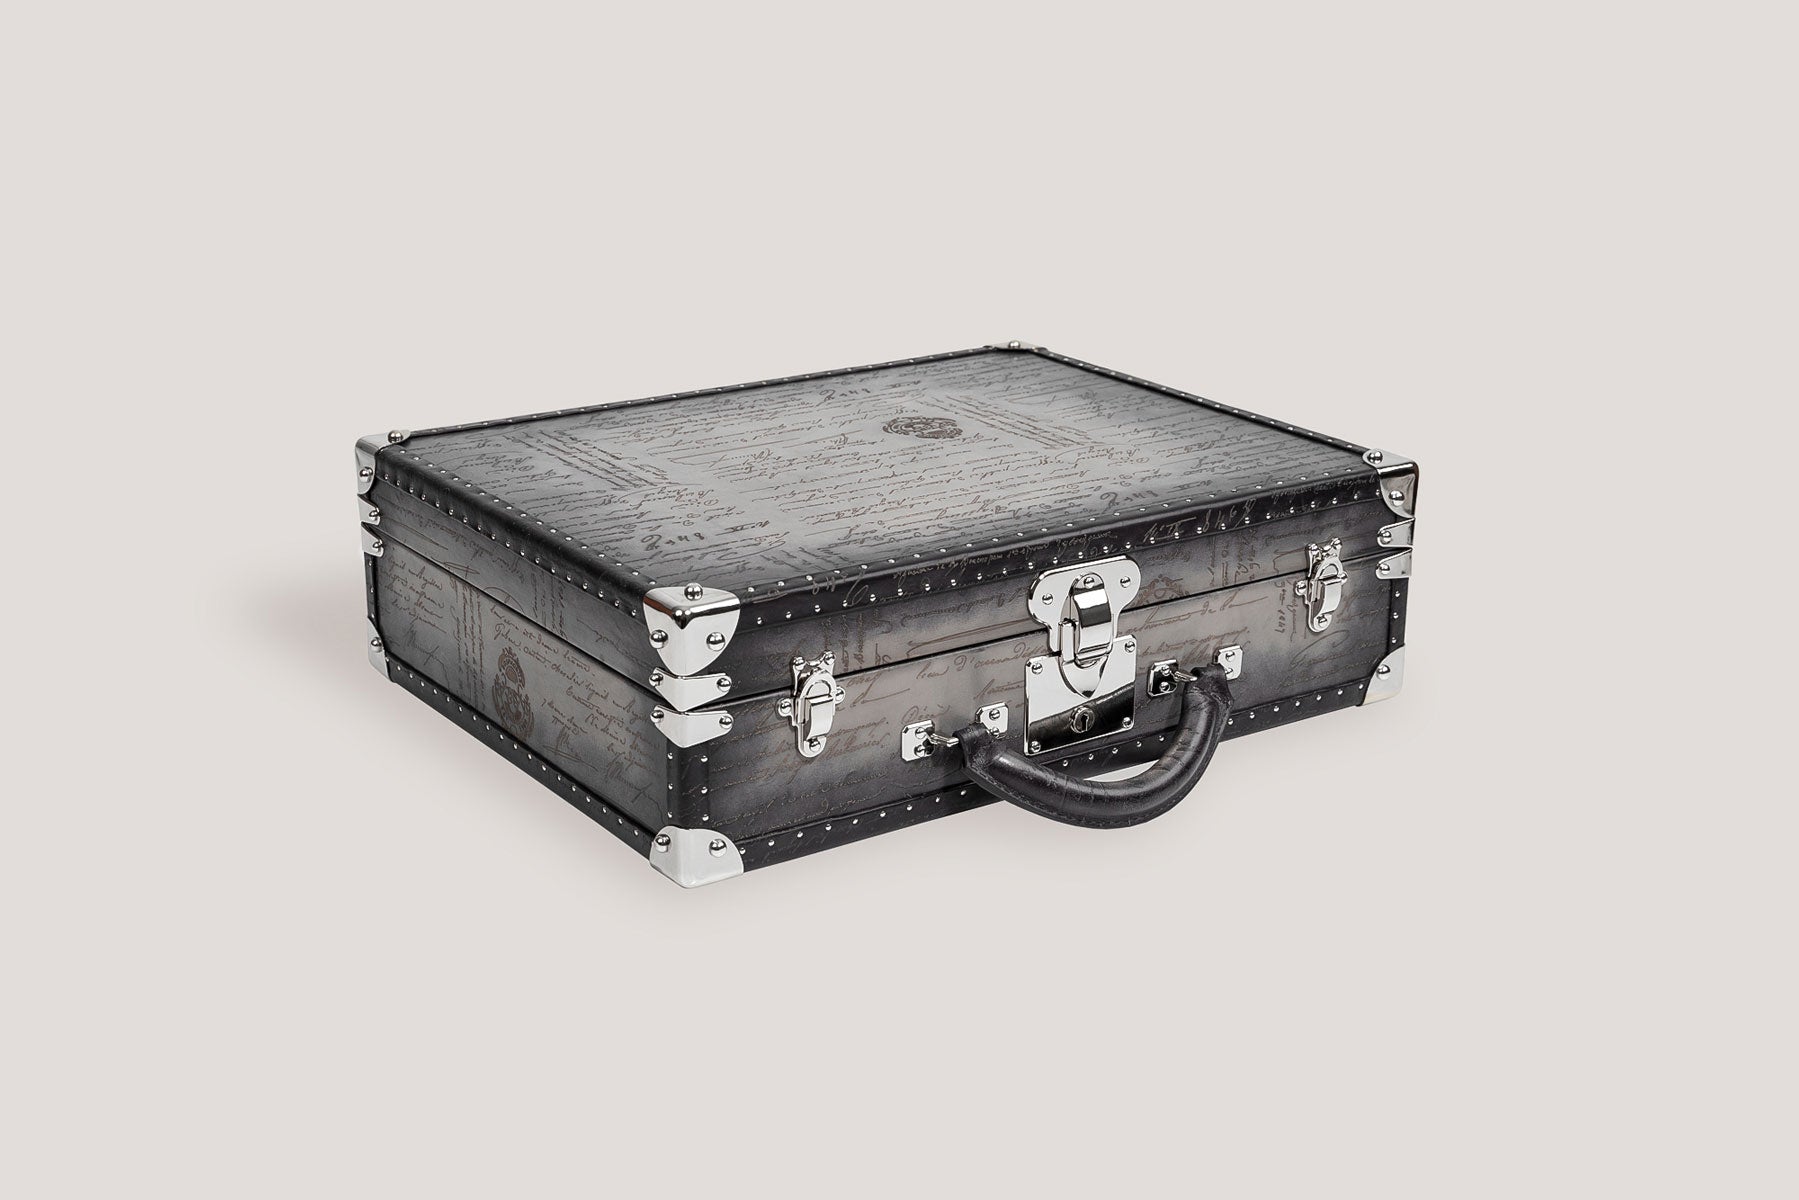 Bosphorus LeatherWatch Trunk - Parchment Patina Grey for 21 Watches